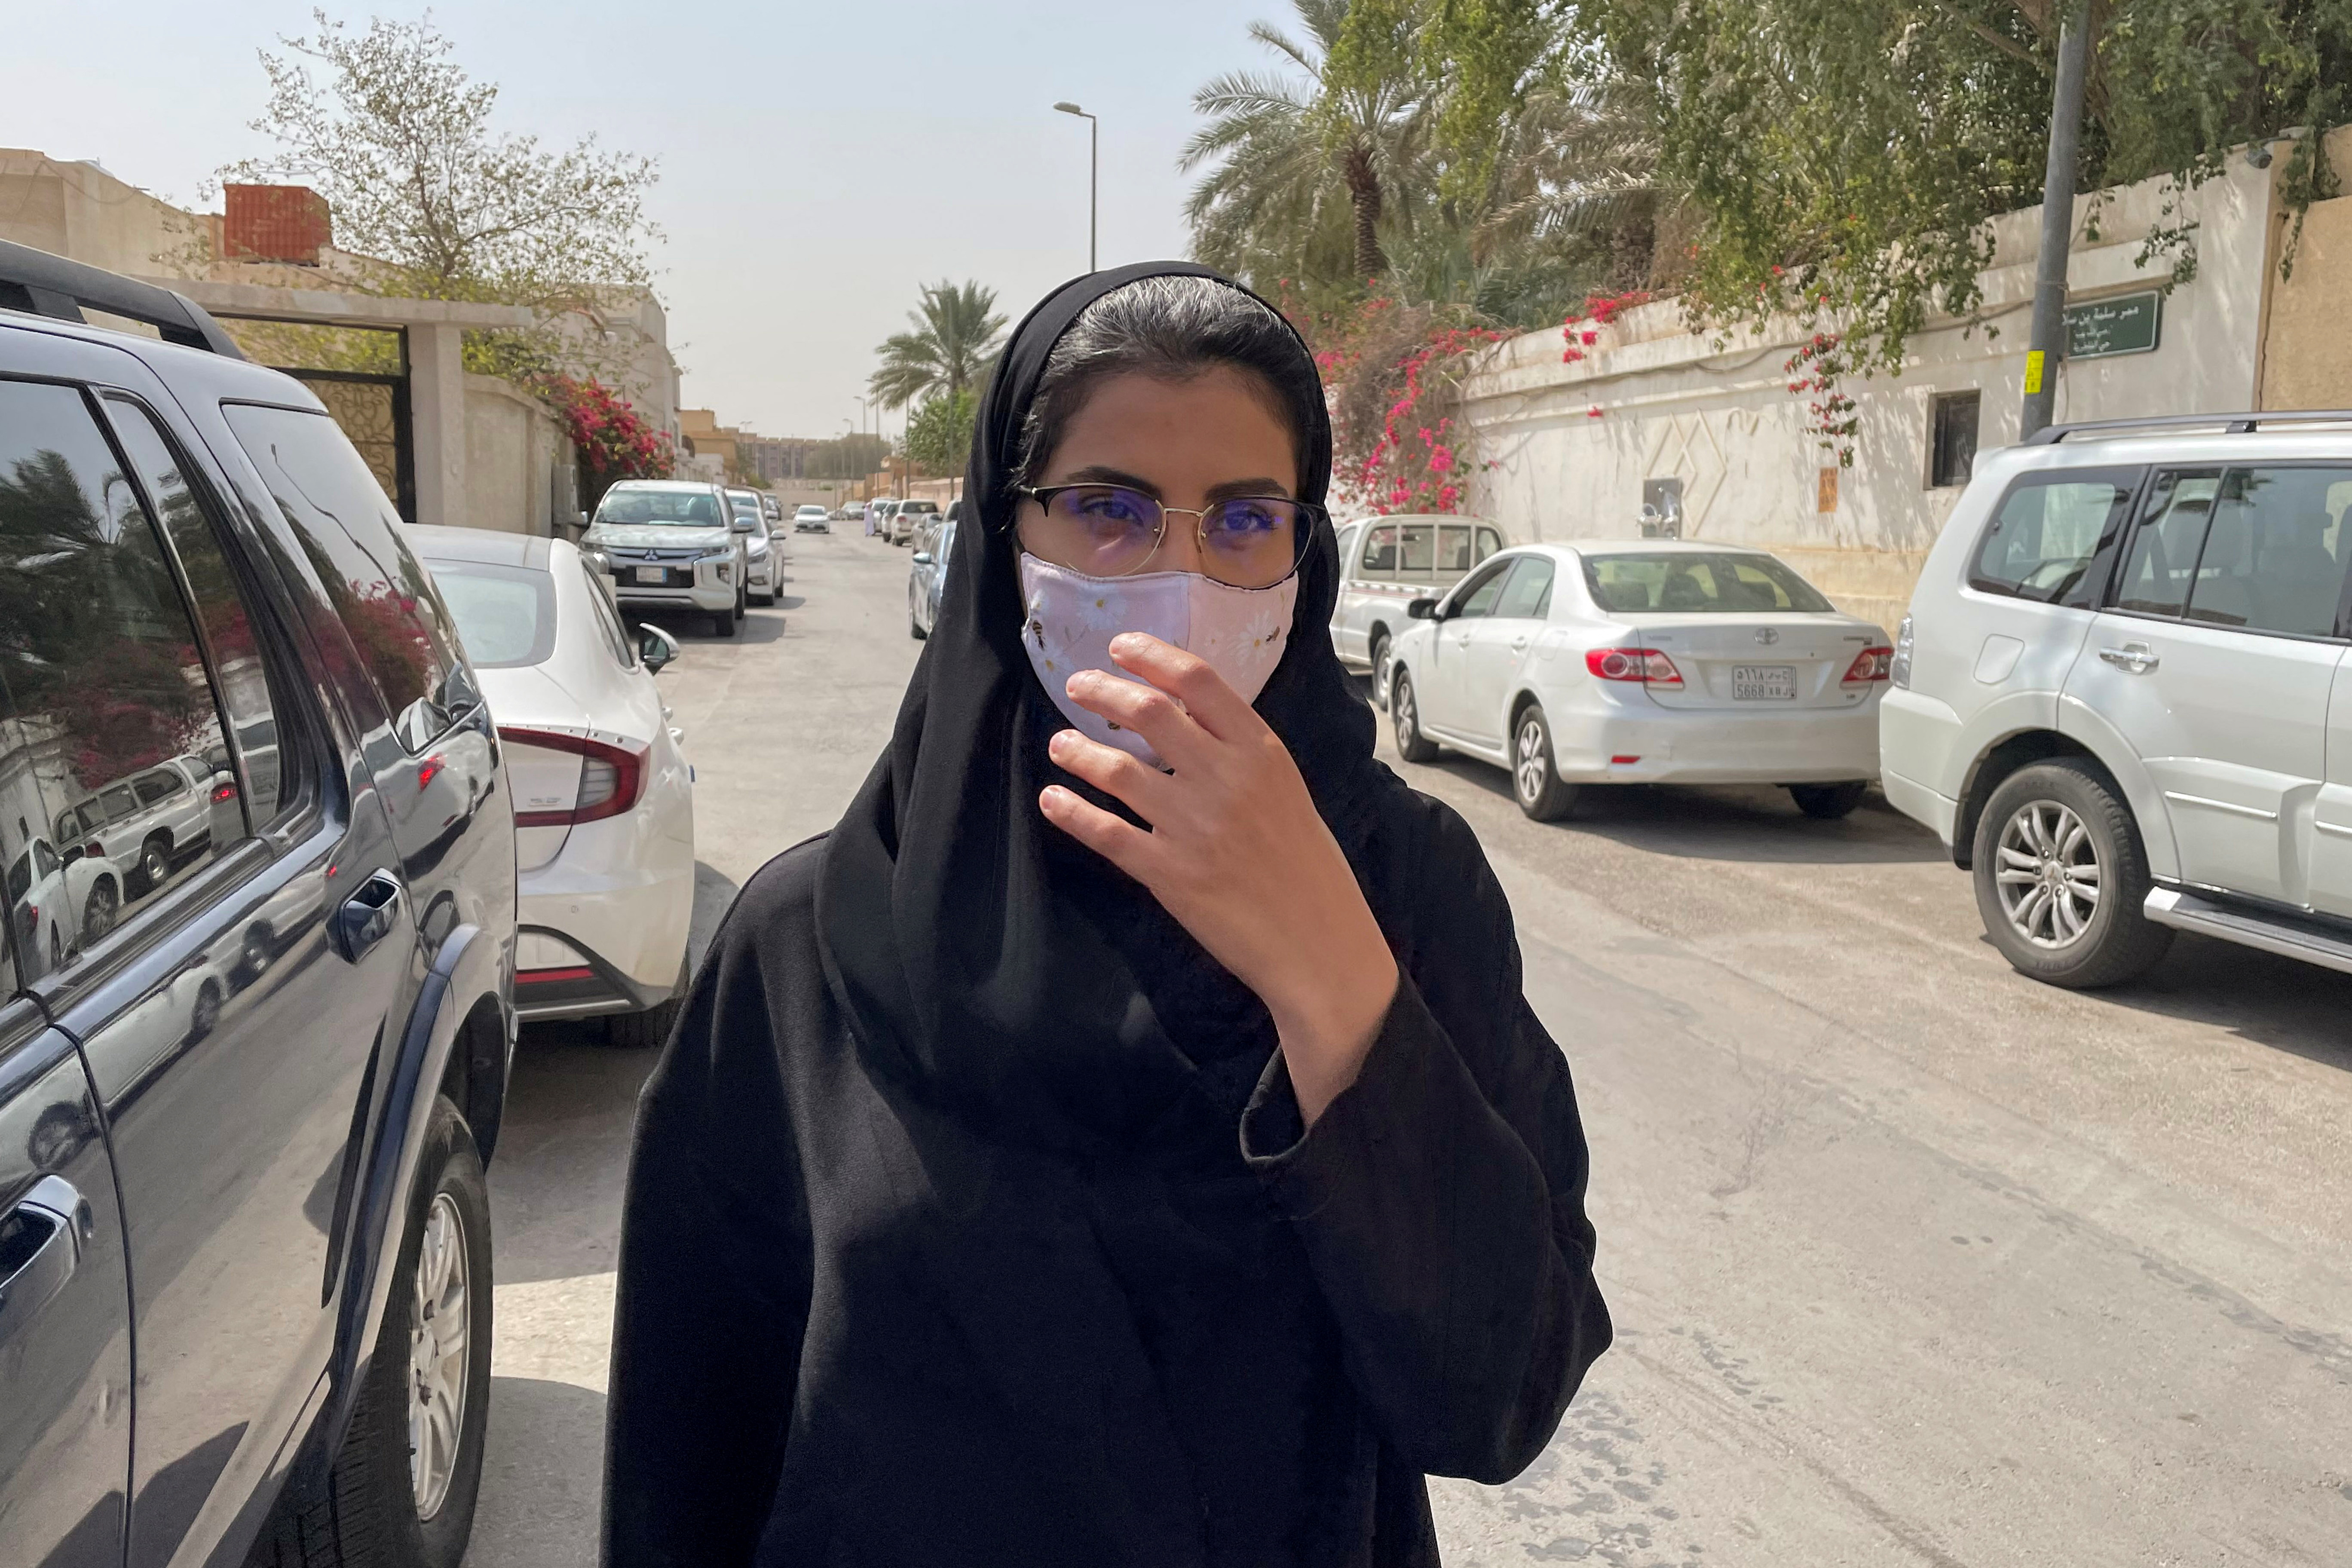 Saudi activist Loujain al-Hathloul makes her way to appear at a special criminal court for an appeals hearing, in Riyadh, Saudi Arabia March 10, 2021. REUTERS/Ahmed Yosri